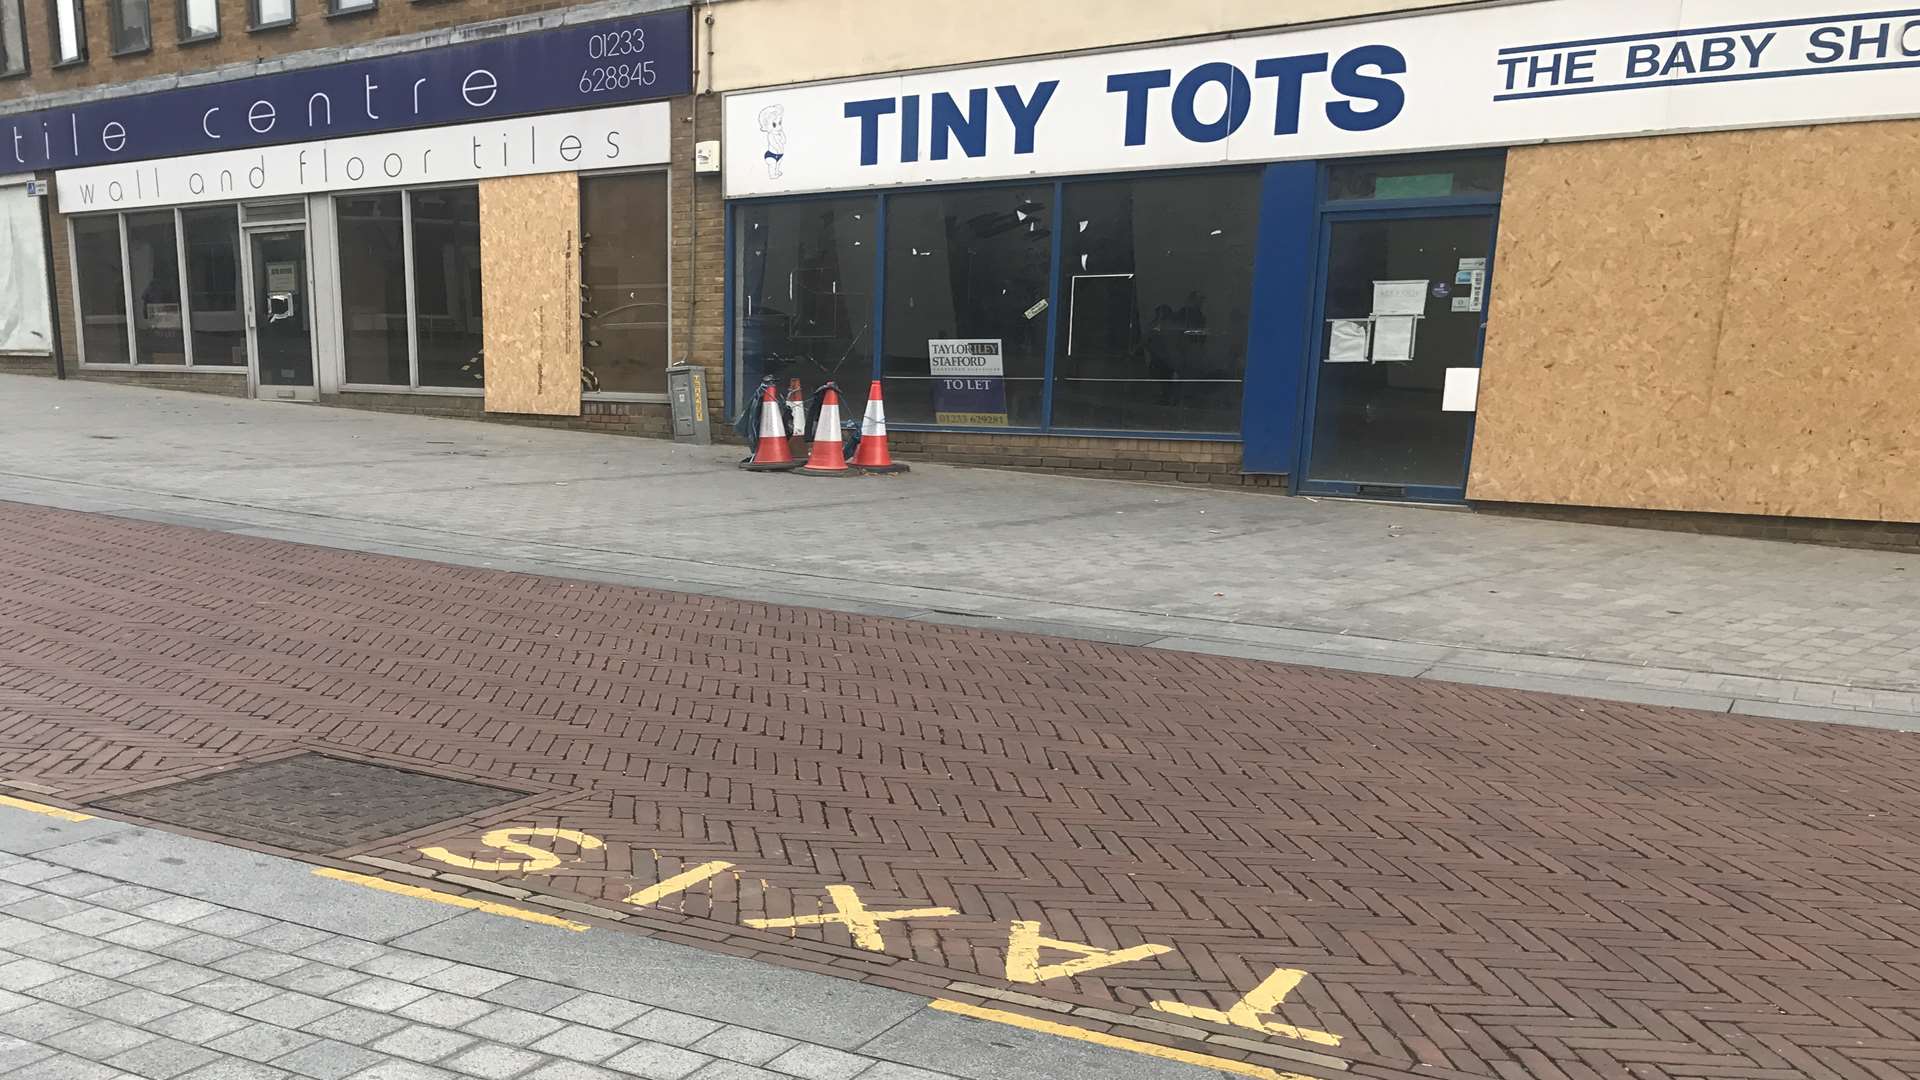 The missing manhole cover is outside Tiny Tots